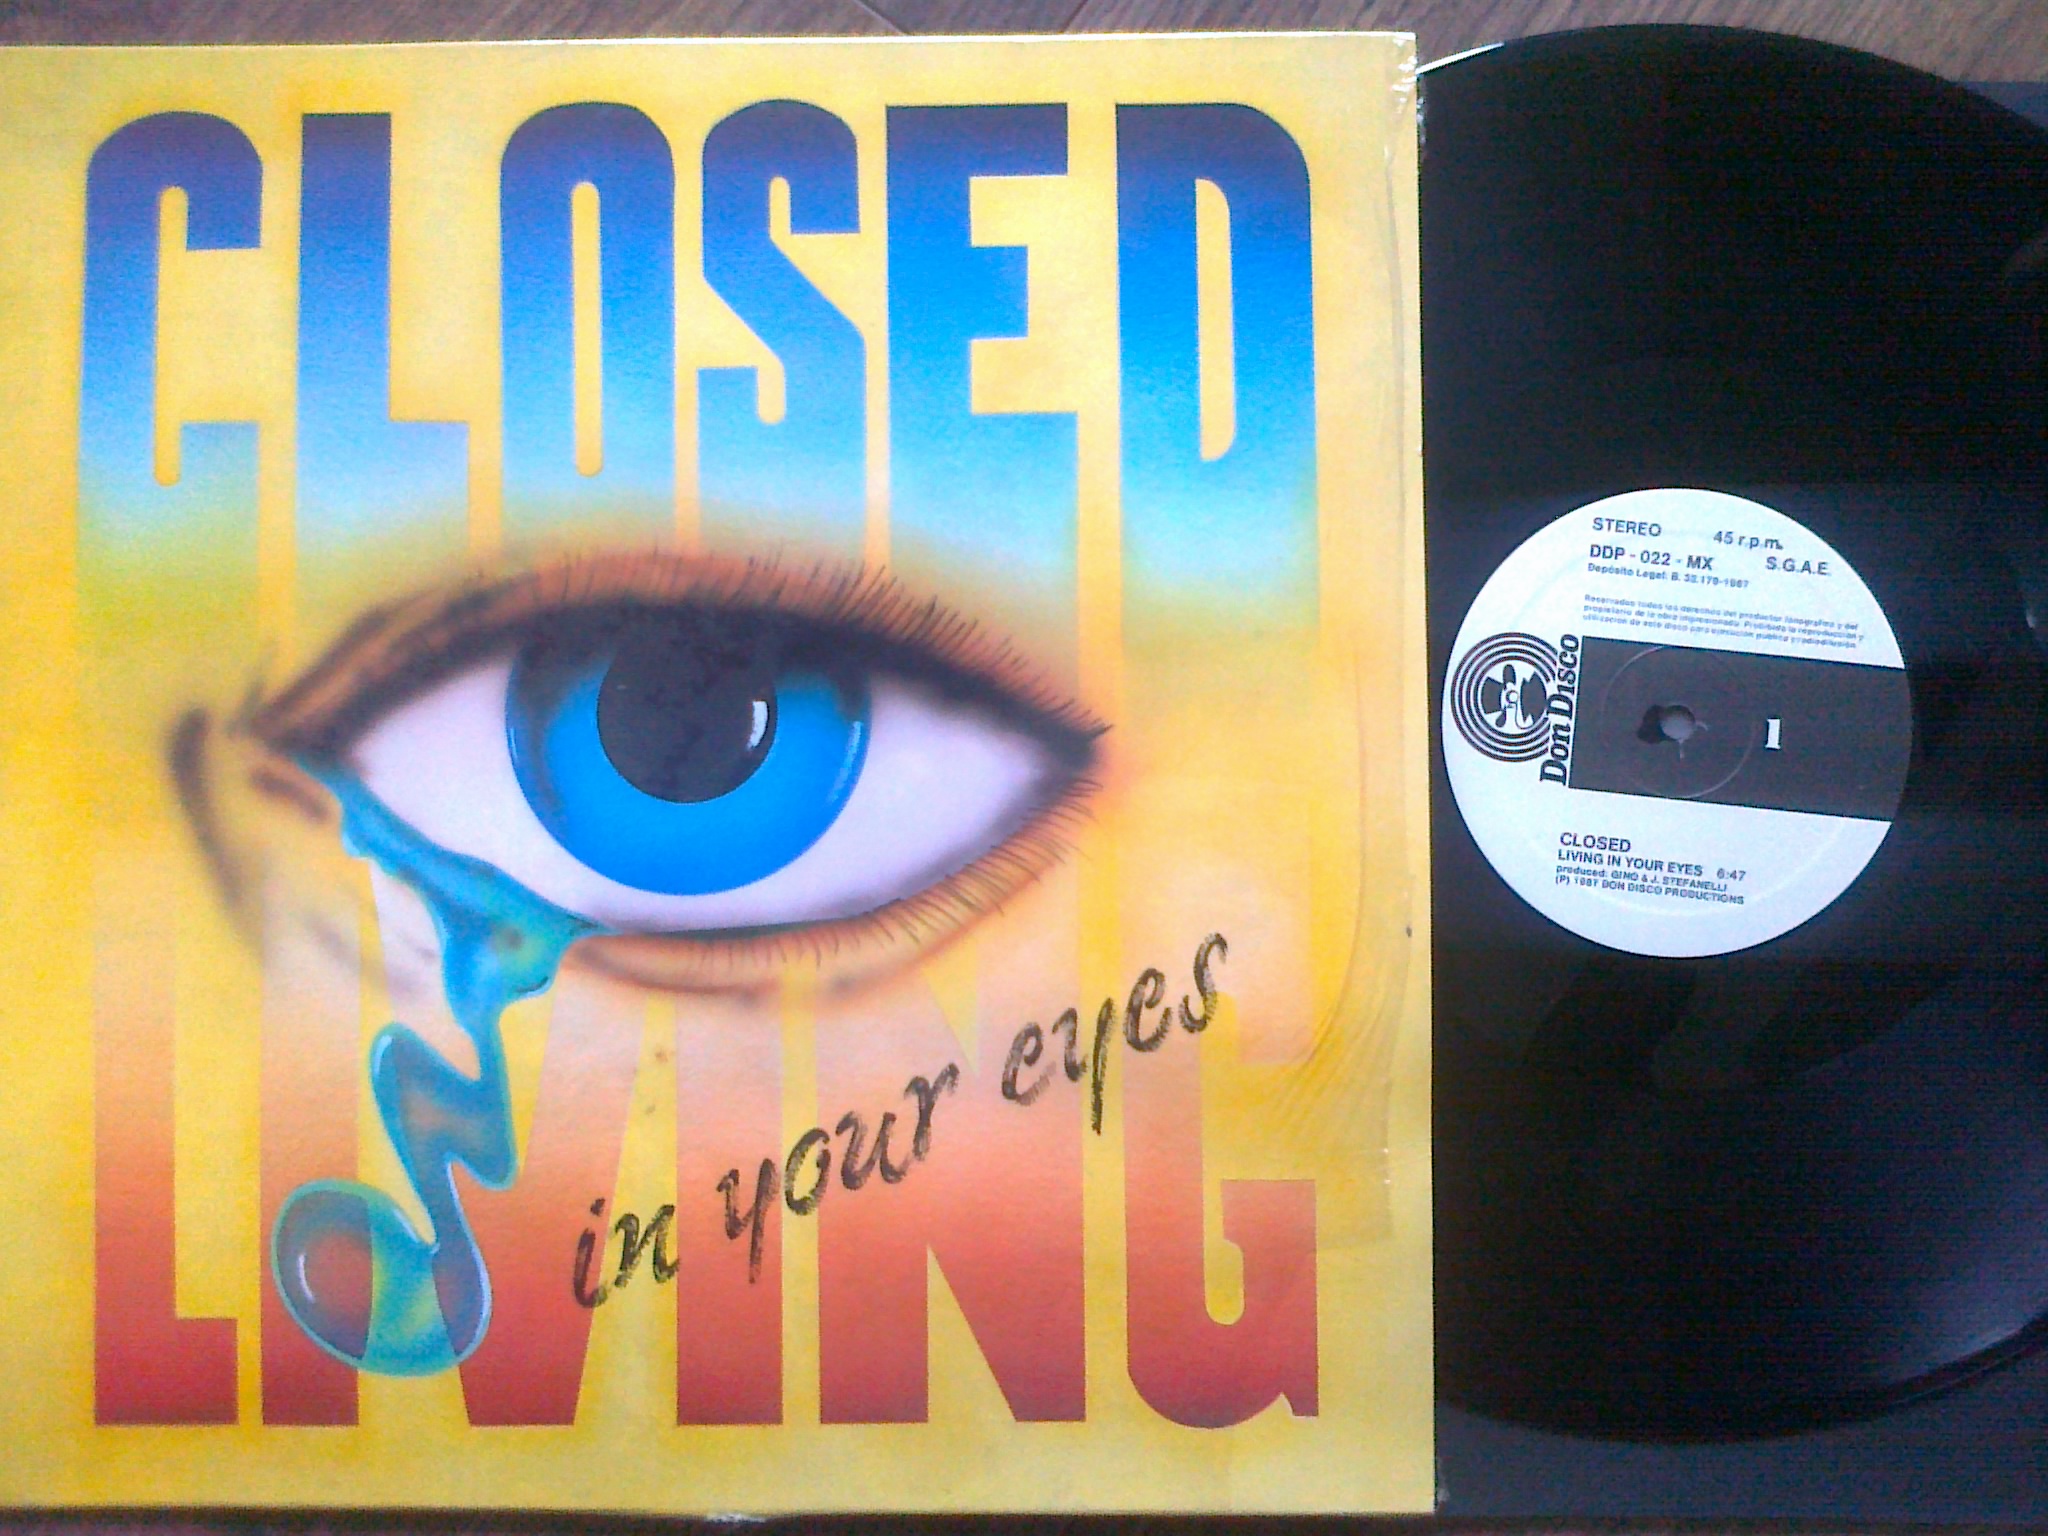 Closed - Living in your eyes